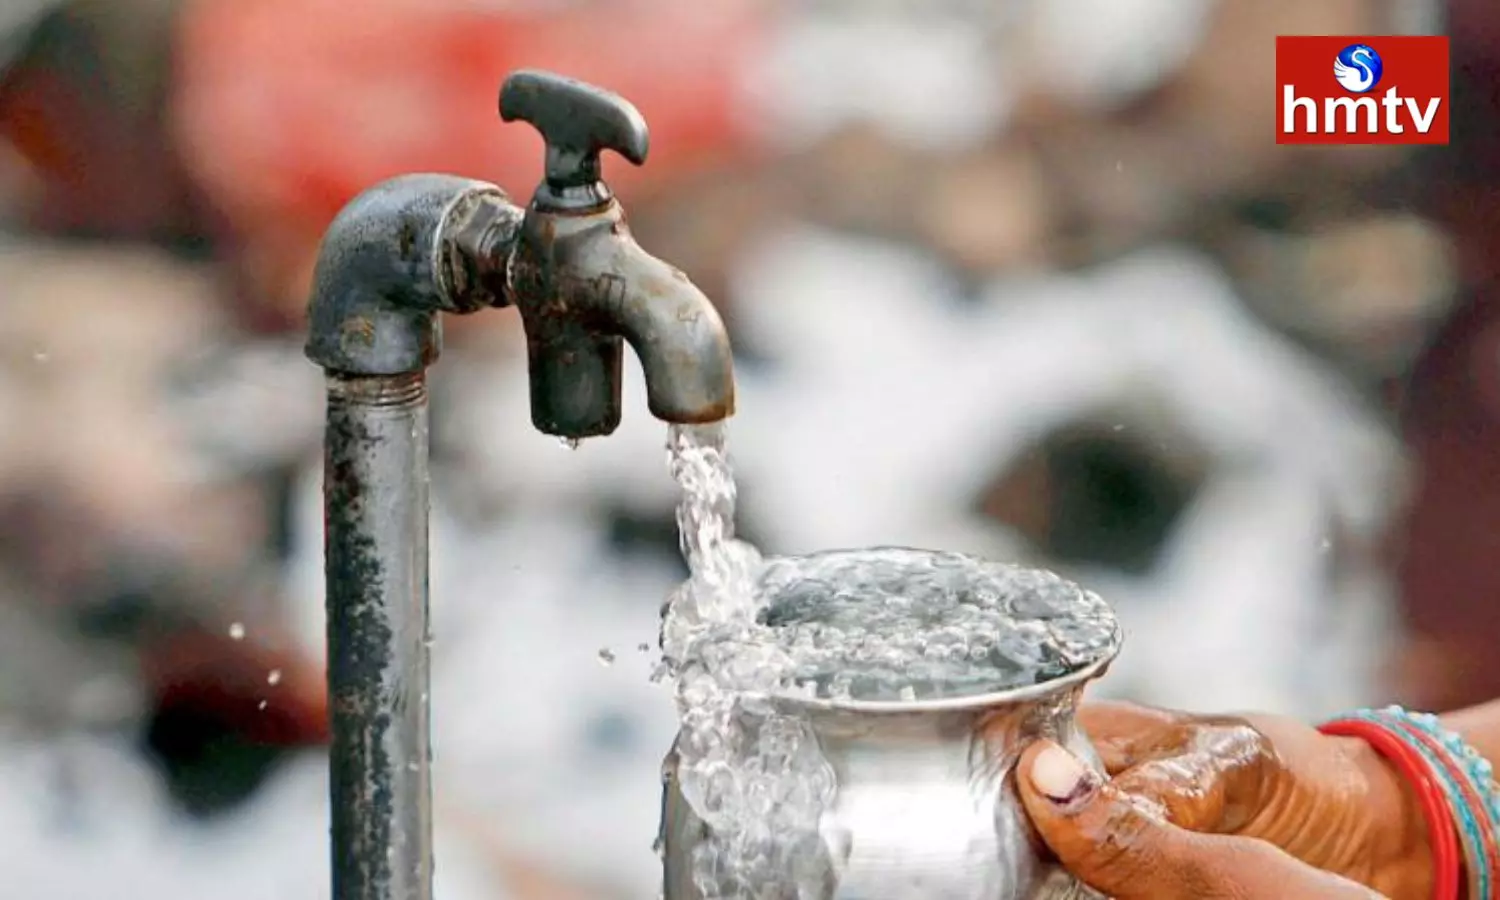 11 People Fell Ill After Drinking Contaminated Water in Maddur